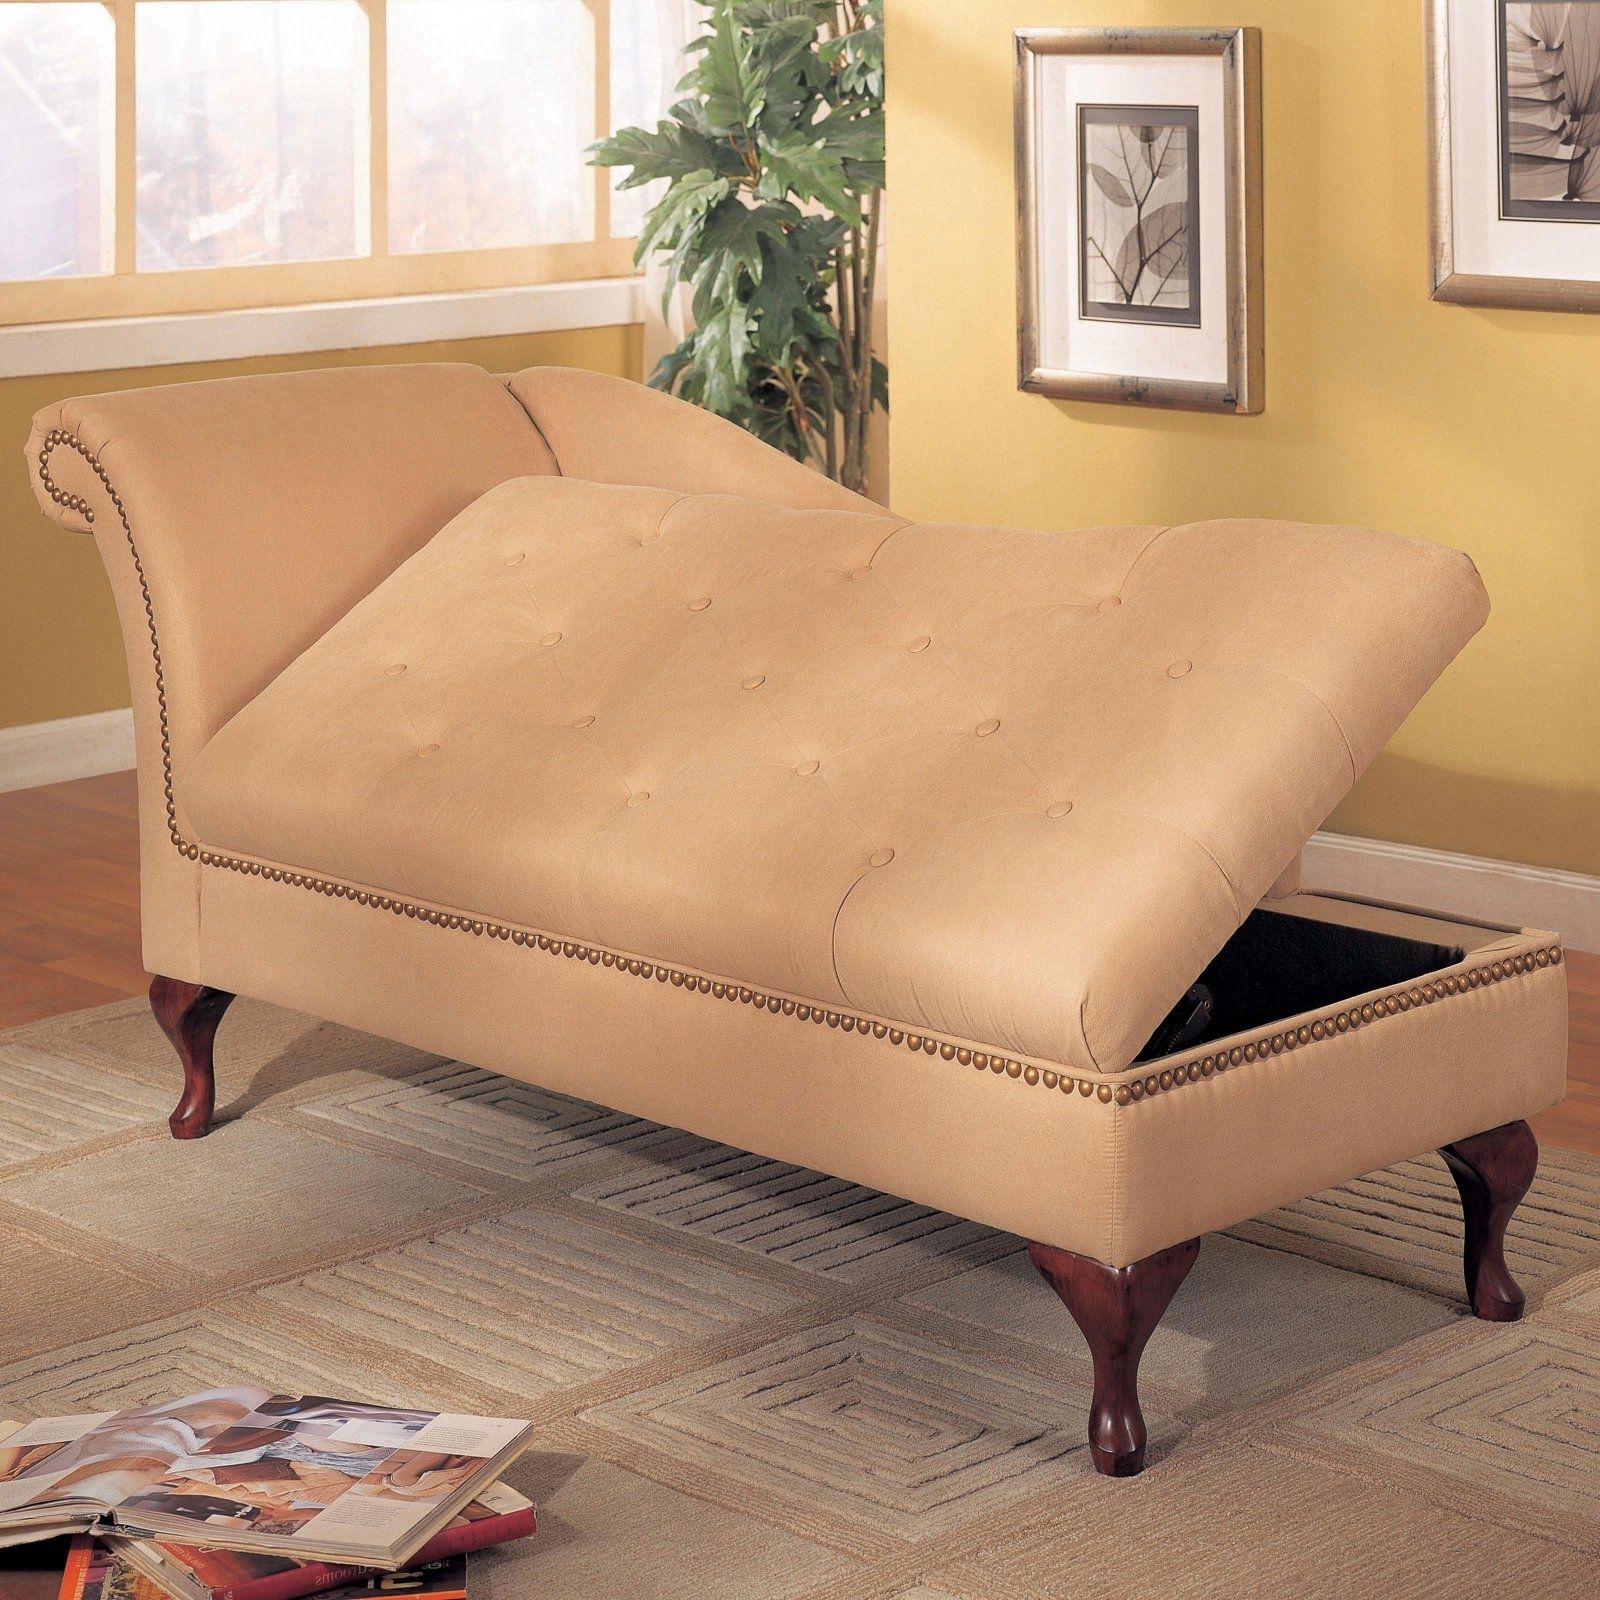 Indoor Chaise Lounges Throughout Famous Indoor Chaise › Indoor Chaise Lounge With Storage Chaise Lounges (View 7 of 15)